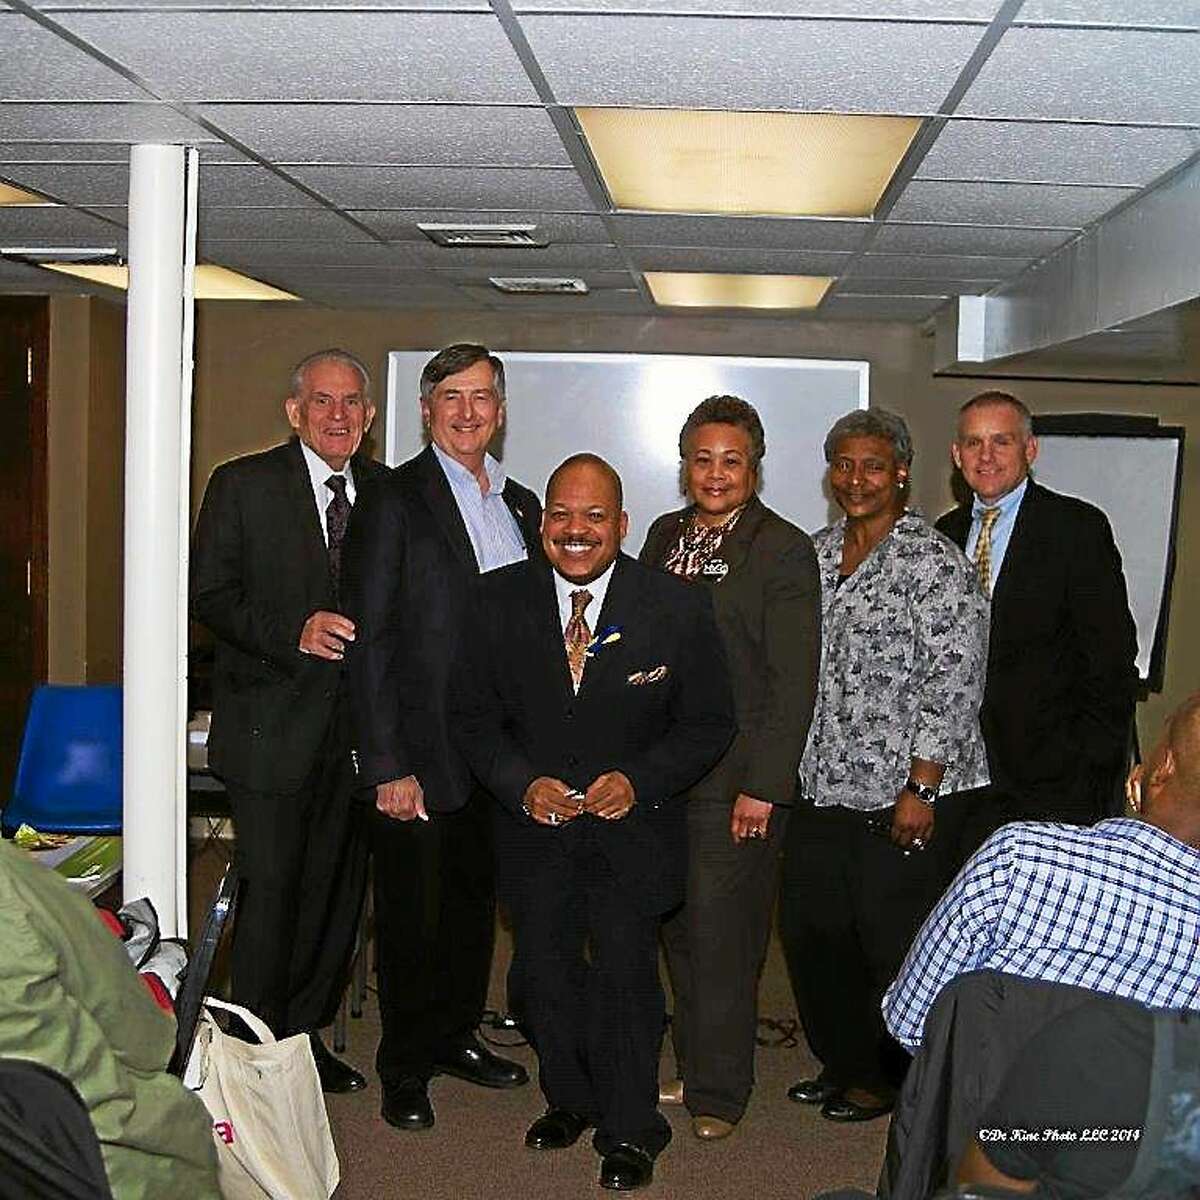 Partipants take part in a sponsor visit to Middlesex County Chamber of Commerce’s Side Street to Main Street Business & Leadership Development Program Shown are: Larry McHugh, President, Middlesex County Chamber of Commerce, Jim Jackson, Program Facilitator, The Essex Group, Floyd W. Green, III, Vice President of Community Relations & Urban Marketing, Aetna, Inc. Faith M. Jackson, Director of Human Relations, City of Middletown, Jennifer De Kine, Middlesex County Chamber of Commerce, Chris Montross, Sr. Director, Corporate Community Investments/Employee Programs, Aetna.